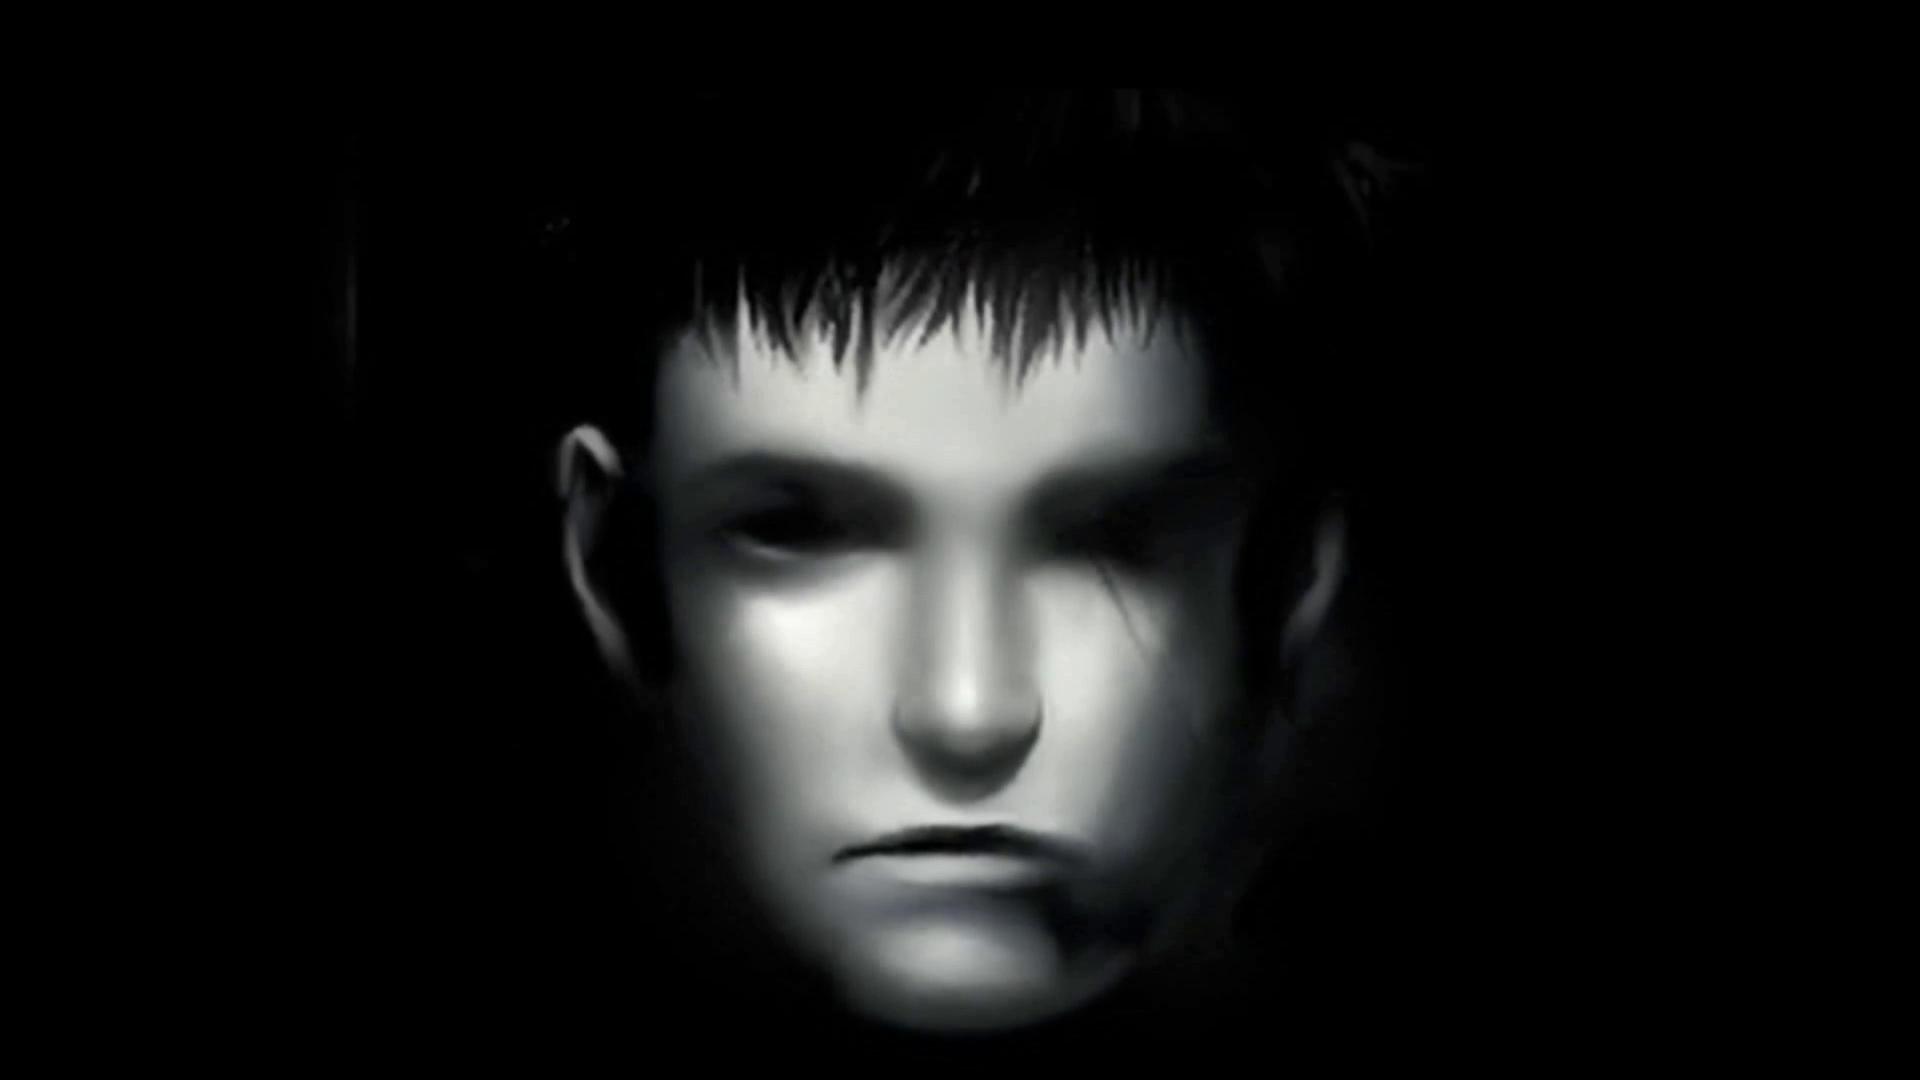 Akira's face. In shadows, his skin looks gray. Darkness covers his eyes. There is a scar from his left eye down his cheek.